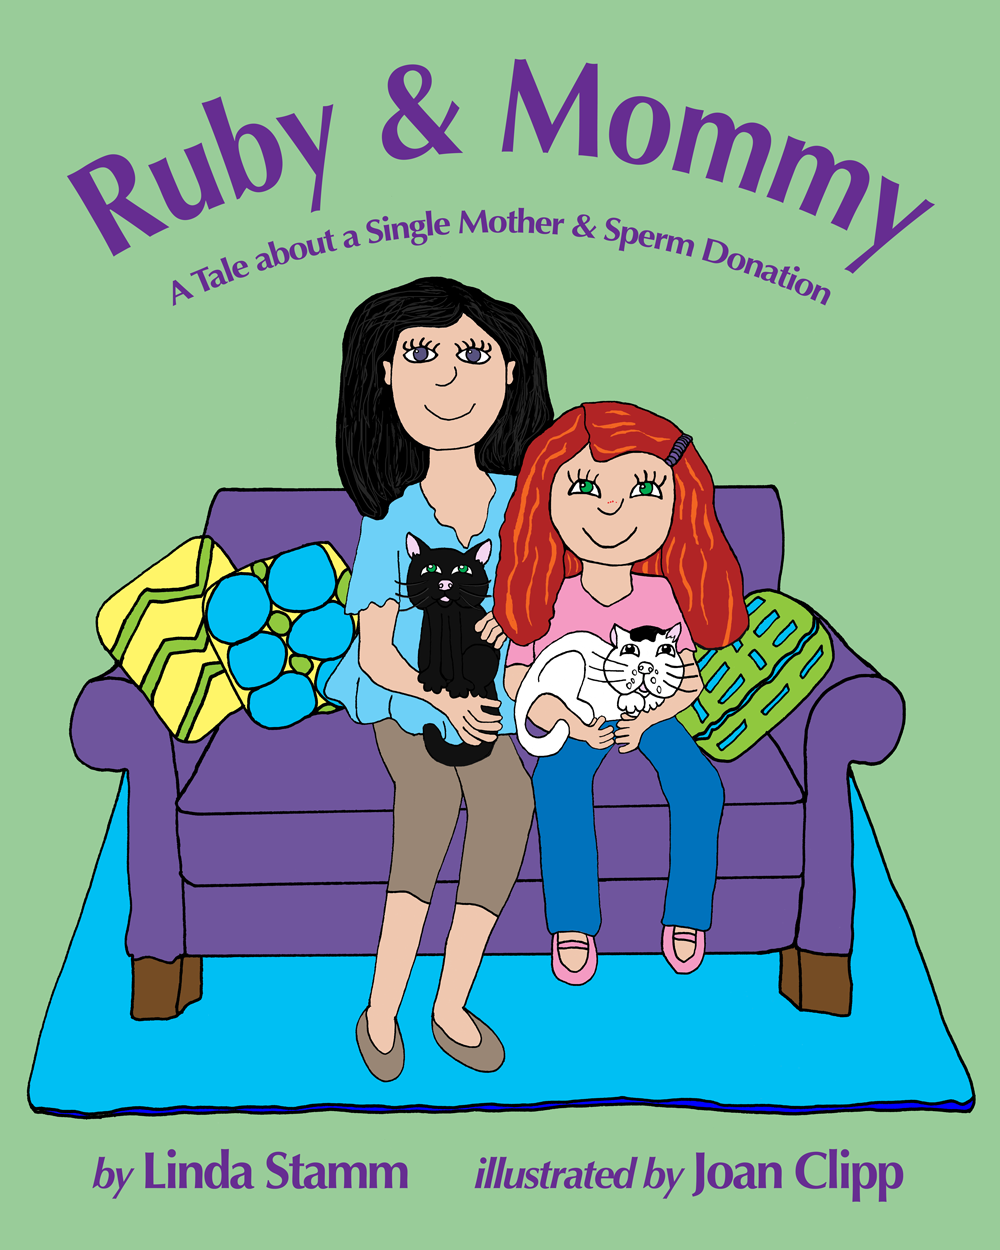 Ruby & Mommy: A Tale about a Single Mother & Sperm Donation